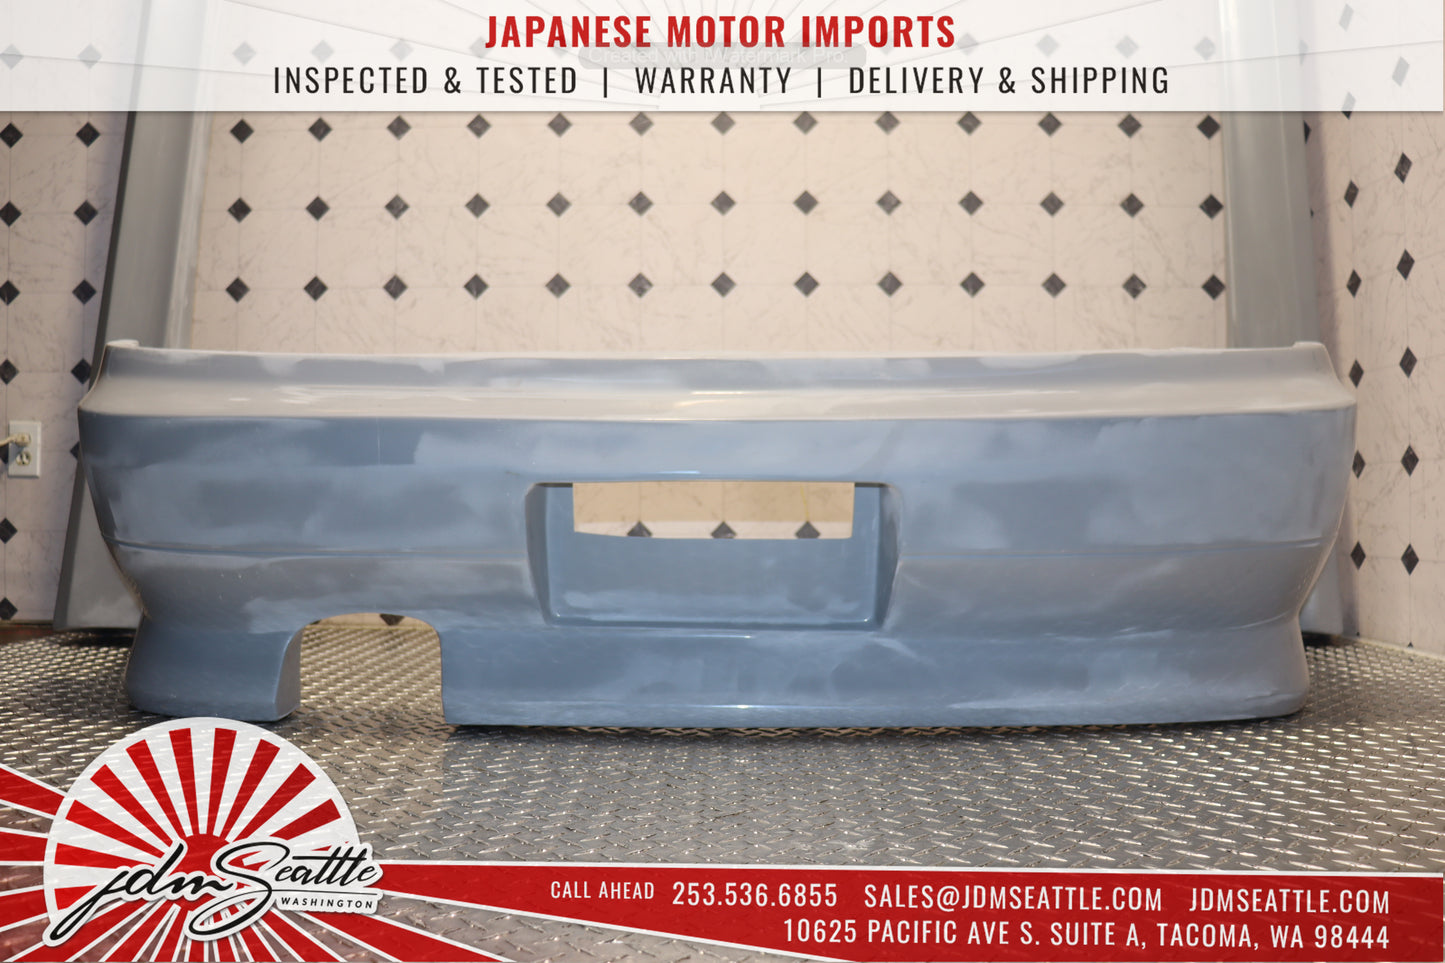 *NEW* JDM MK2 TOYOTA CHASER JZX100 S1 BODY KIT FRONT / REAR BUMPERS & SIDE SKIRTS